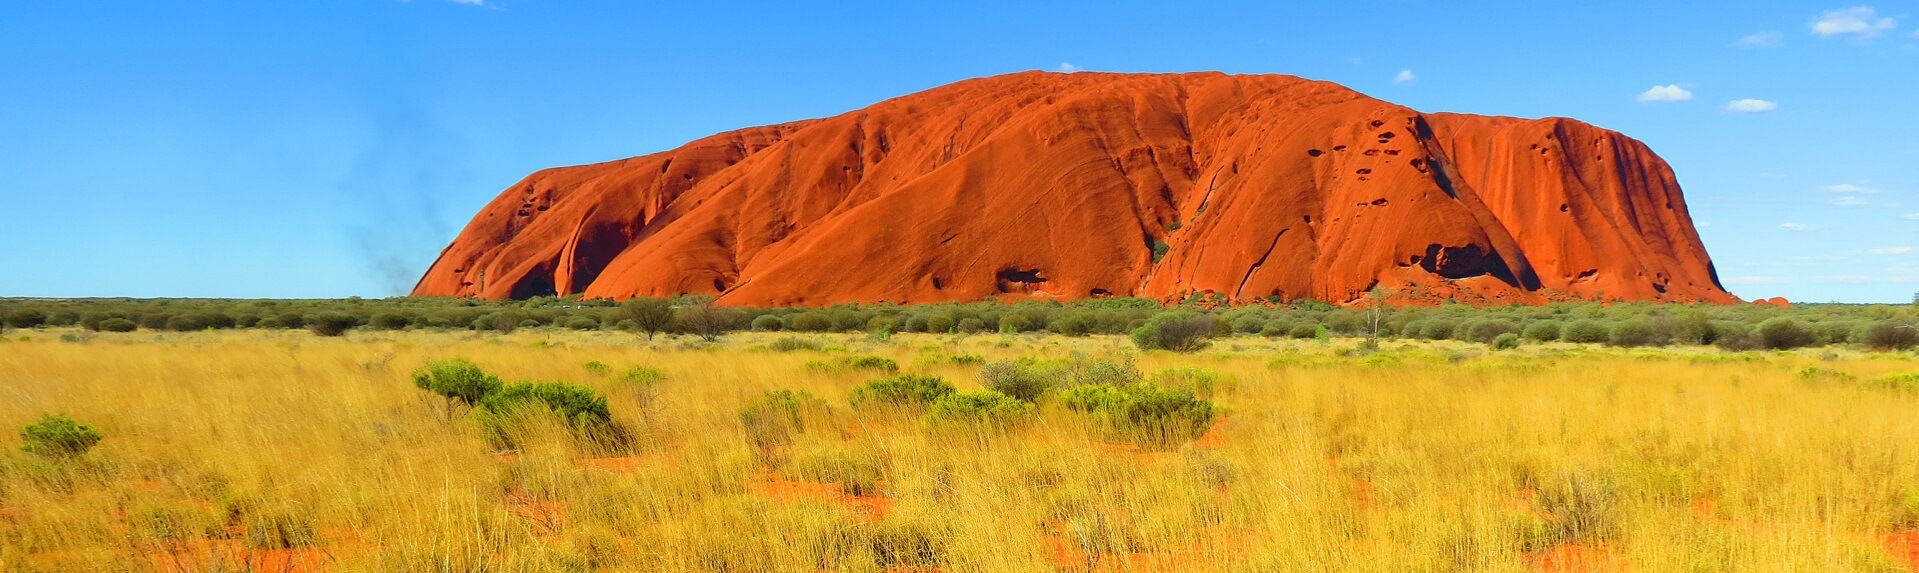 What is the closest town to Uluru?